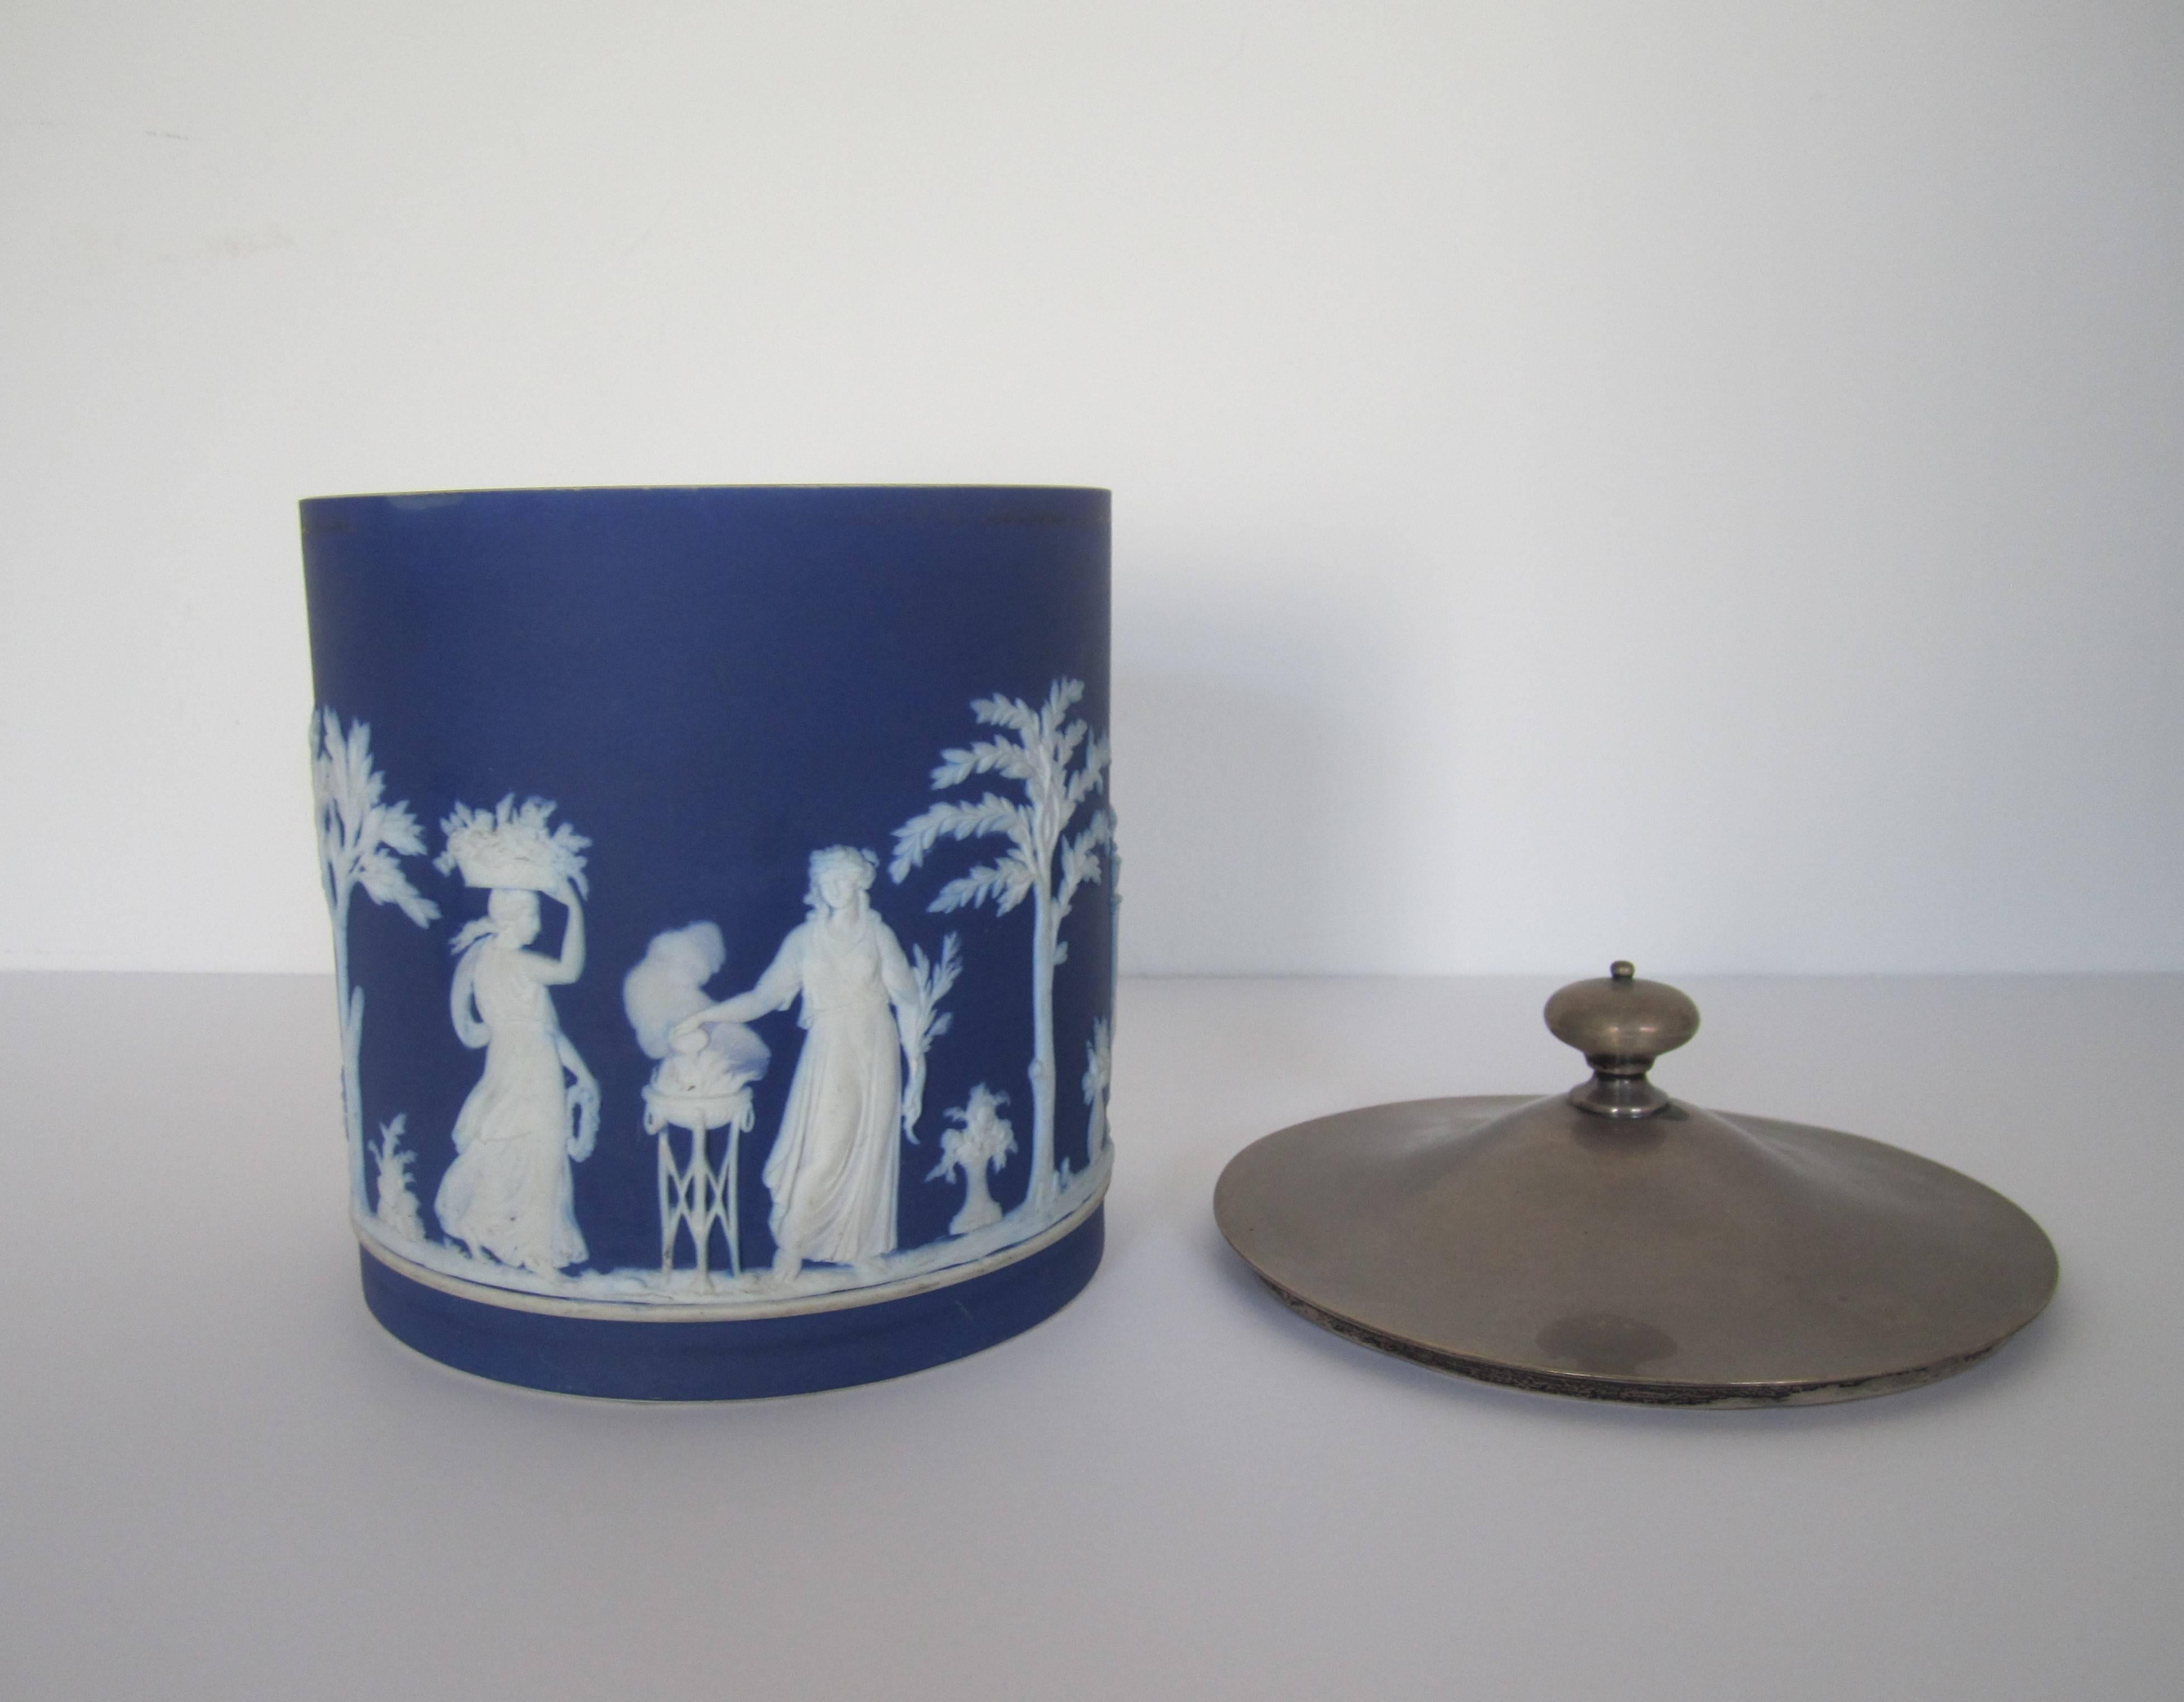 Neoclassical Antique Wedgwood Jasperware Blue, White and Sterling Silver Vessel, England